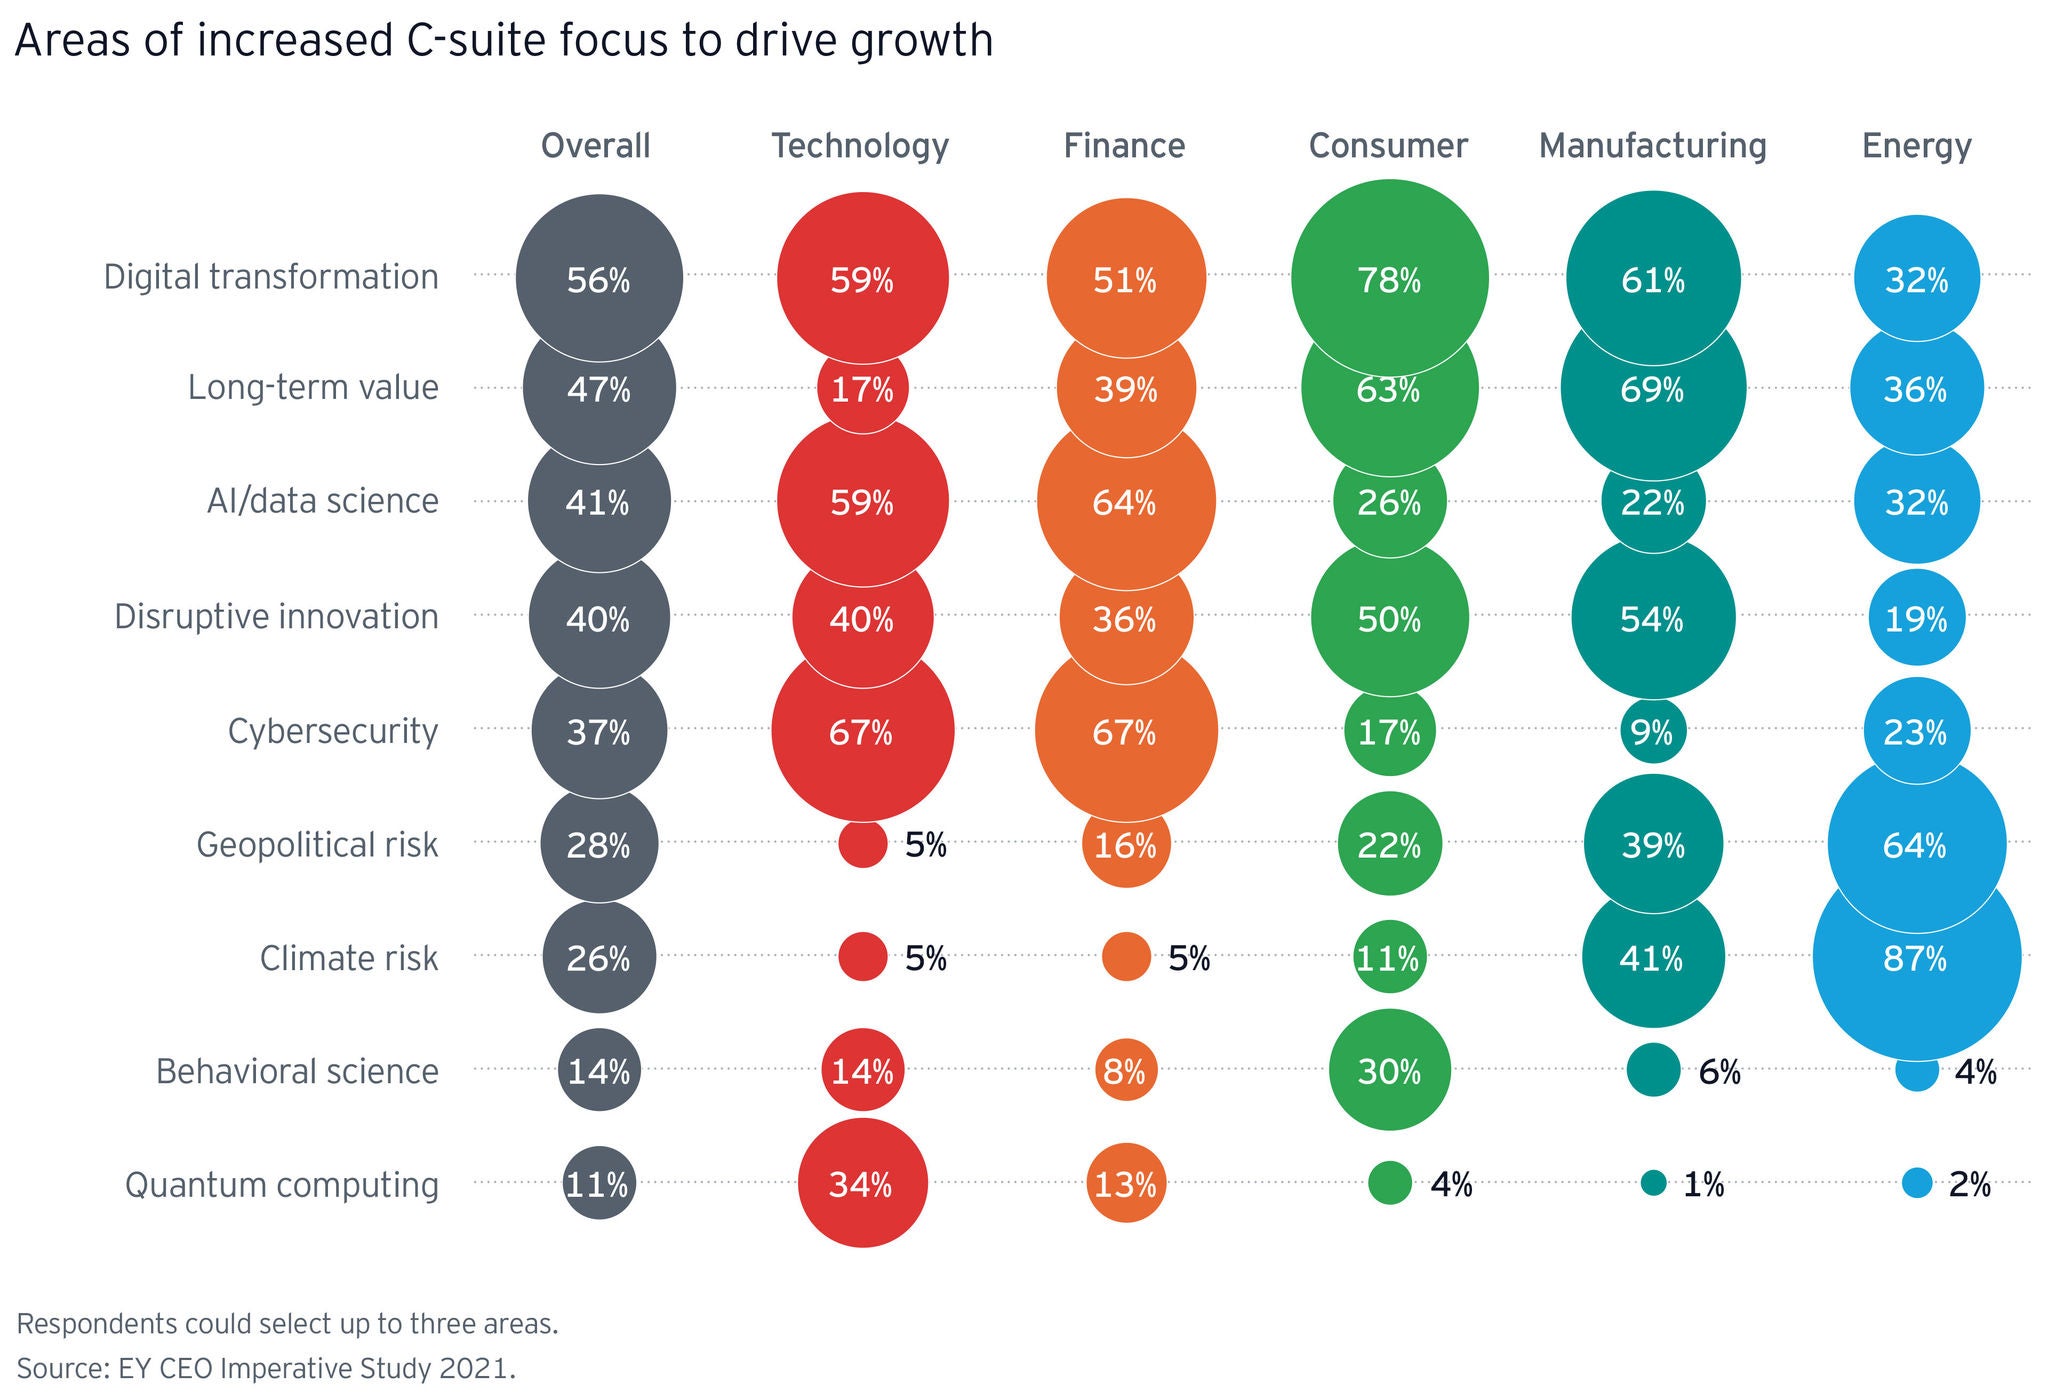 Areas of increased C-suite focus to drive growth